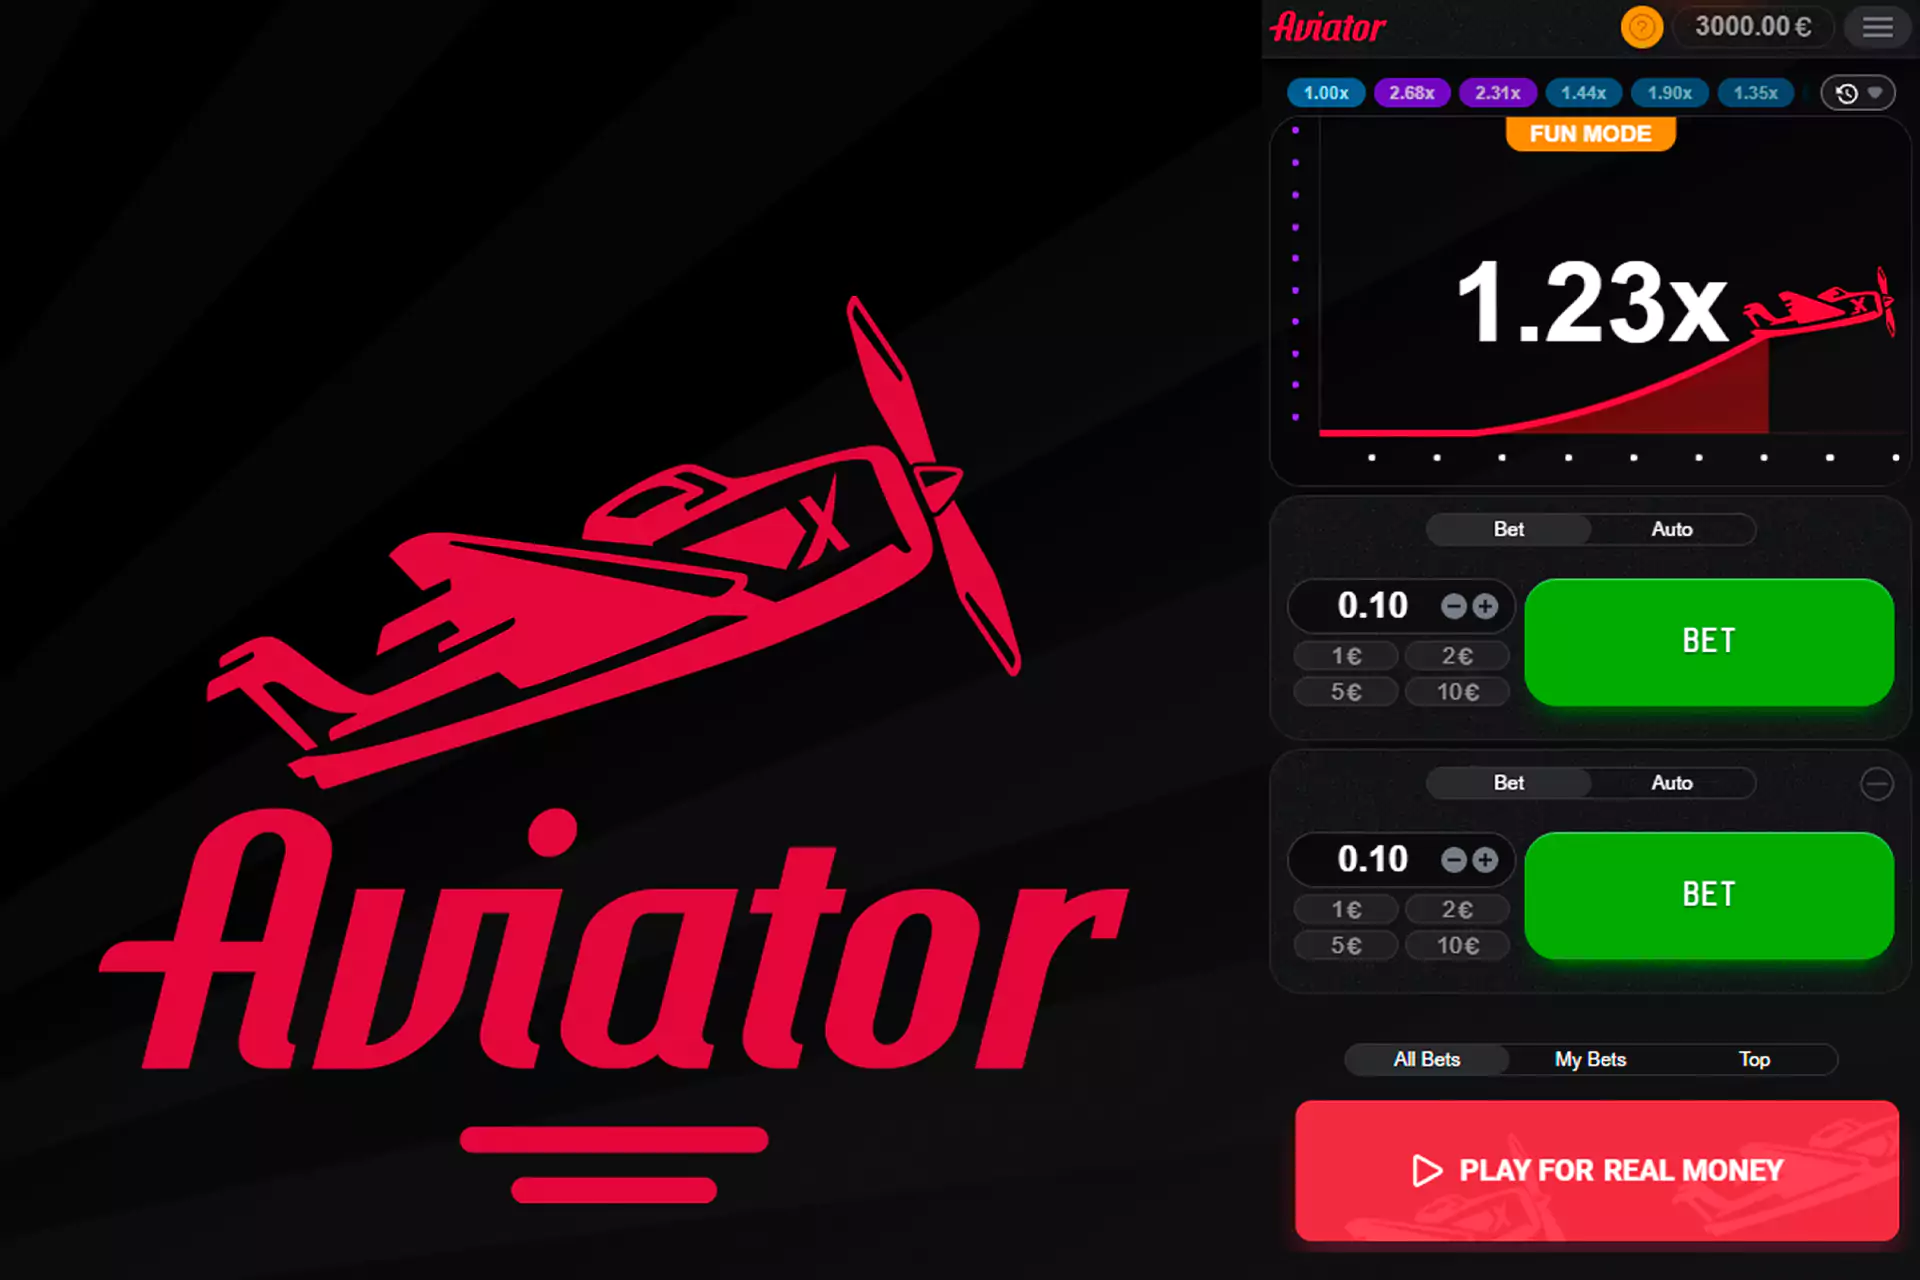 The Aviator slot has a simple and user-friendly interface.